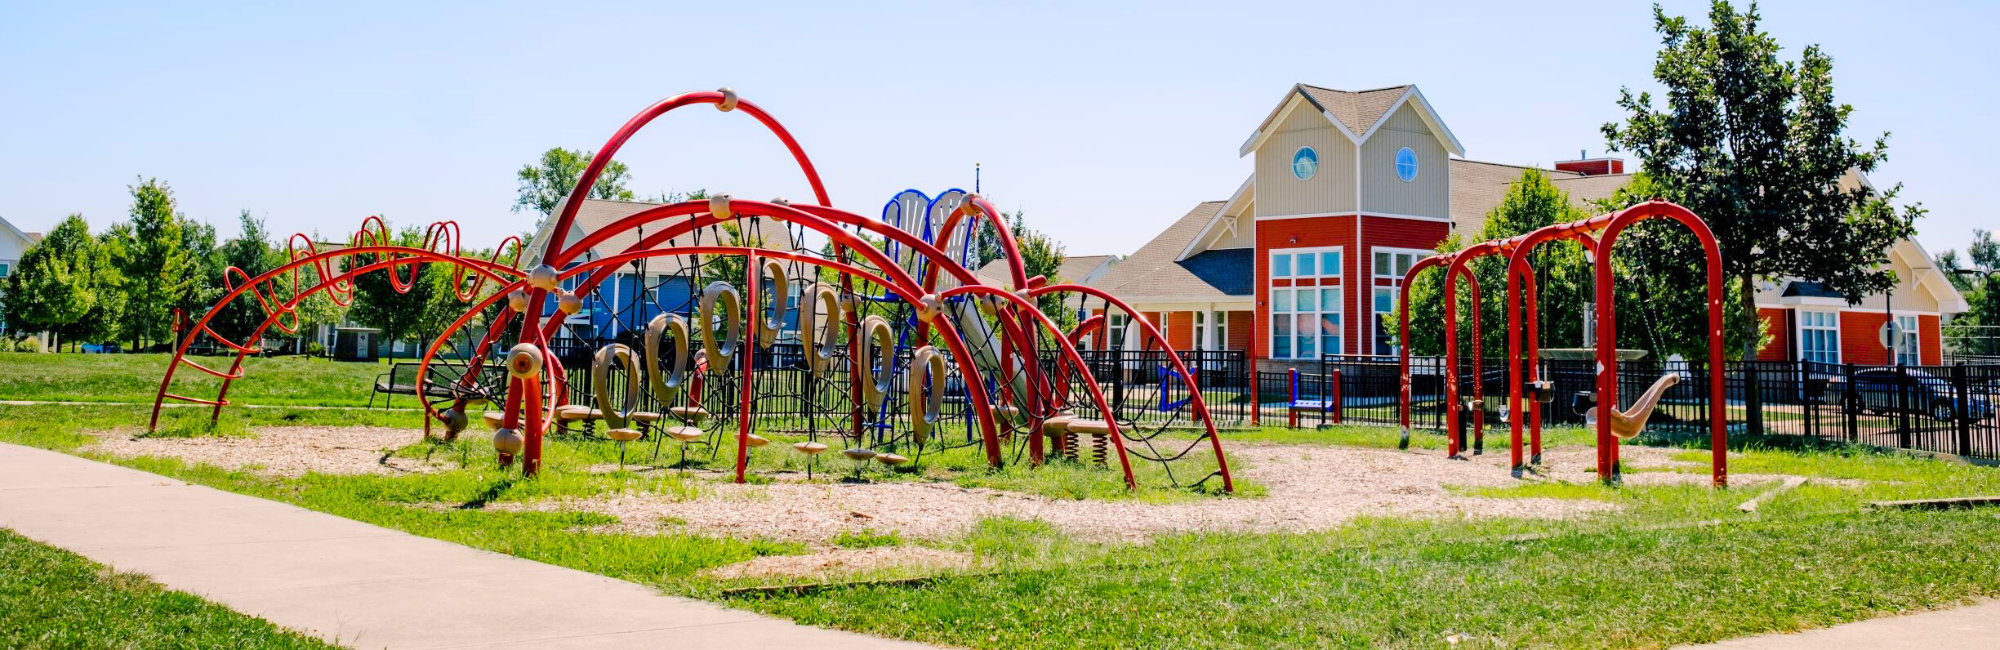 park in a neighborhood with a playground